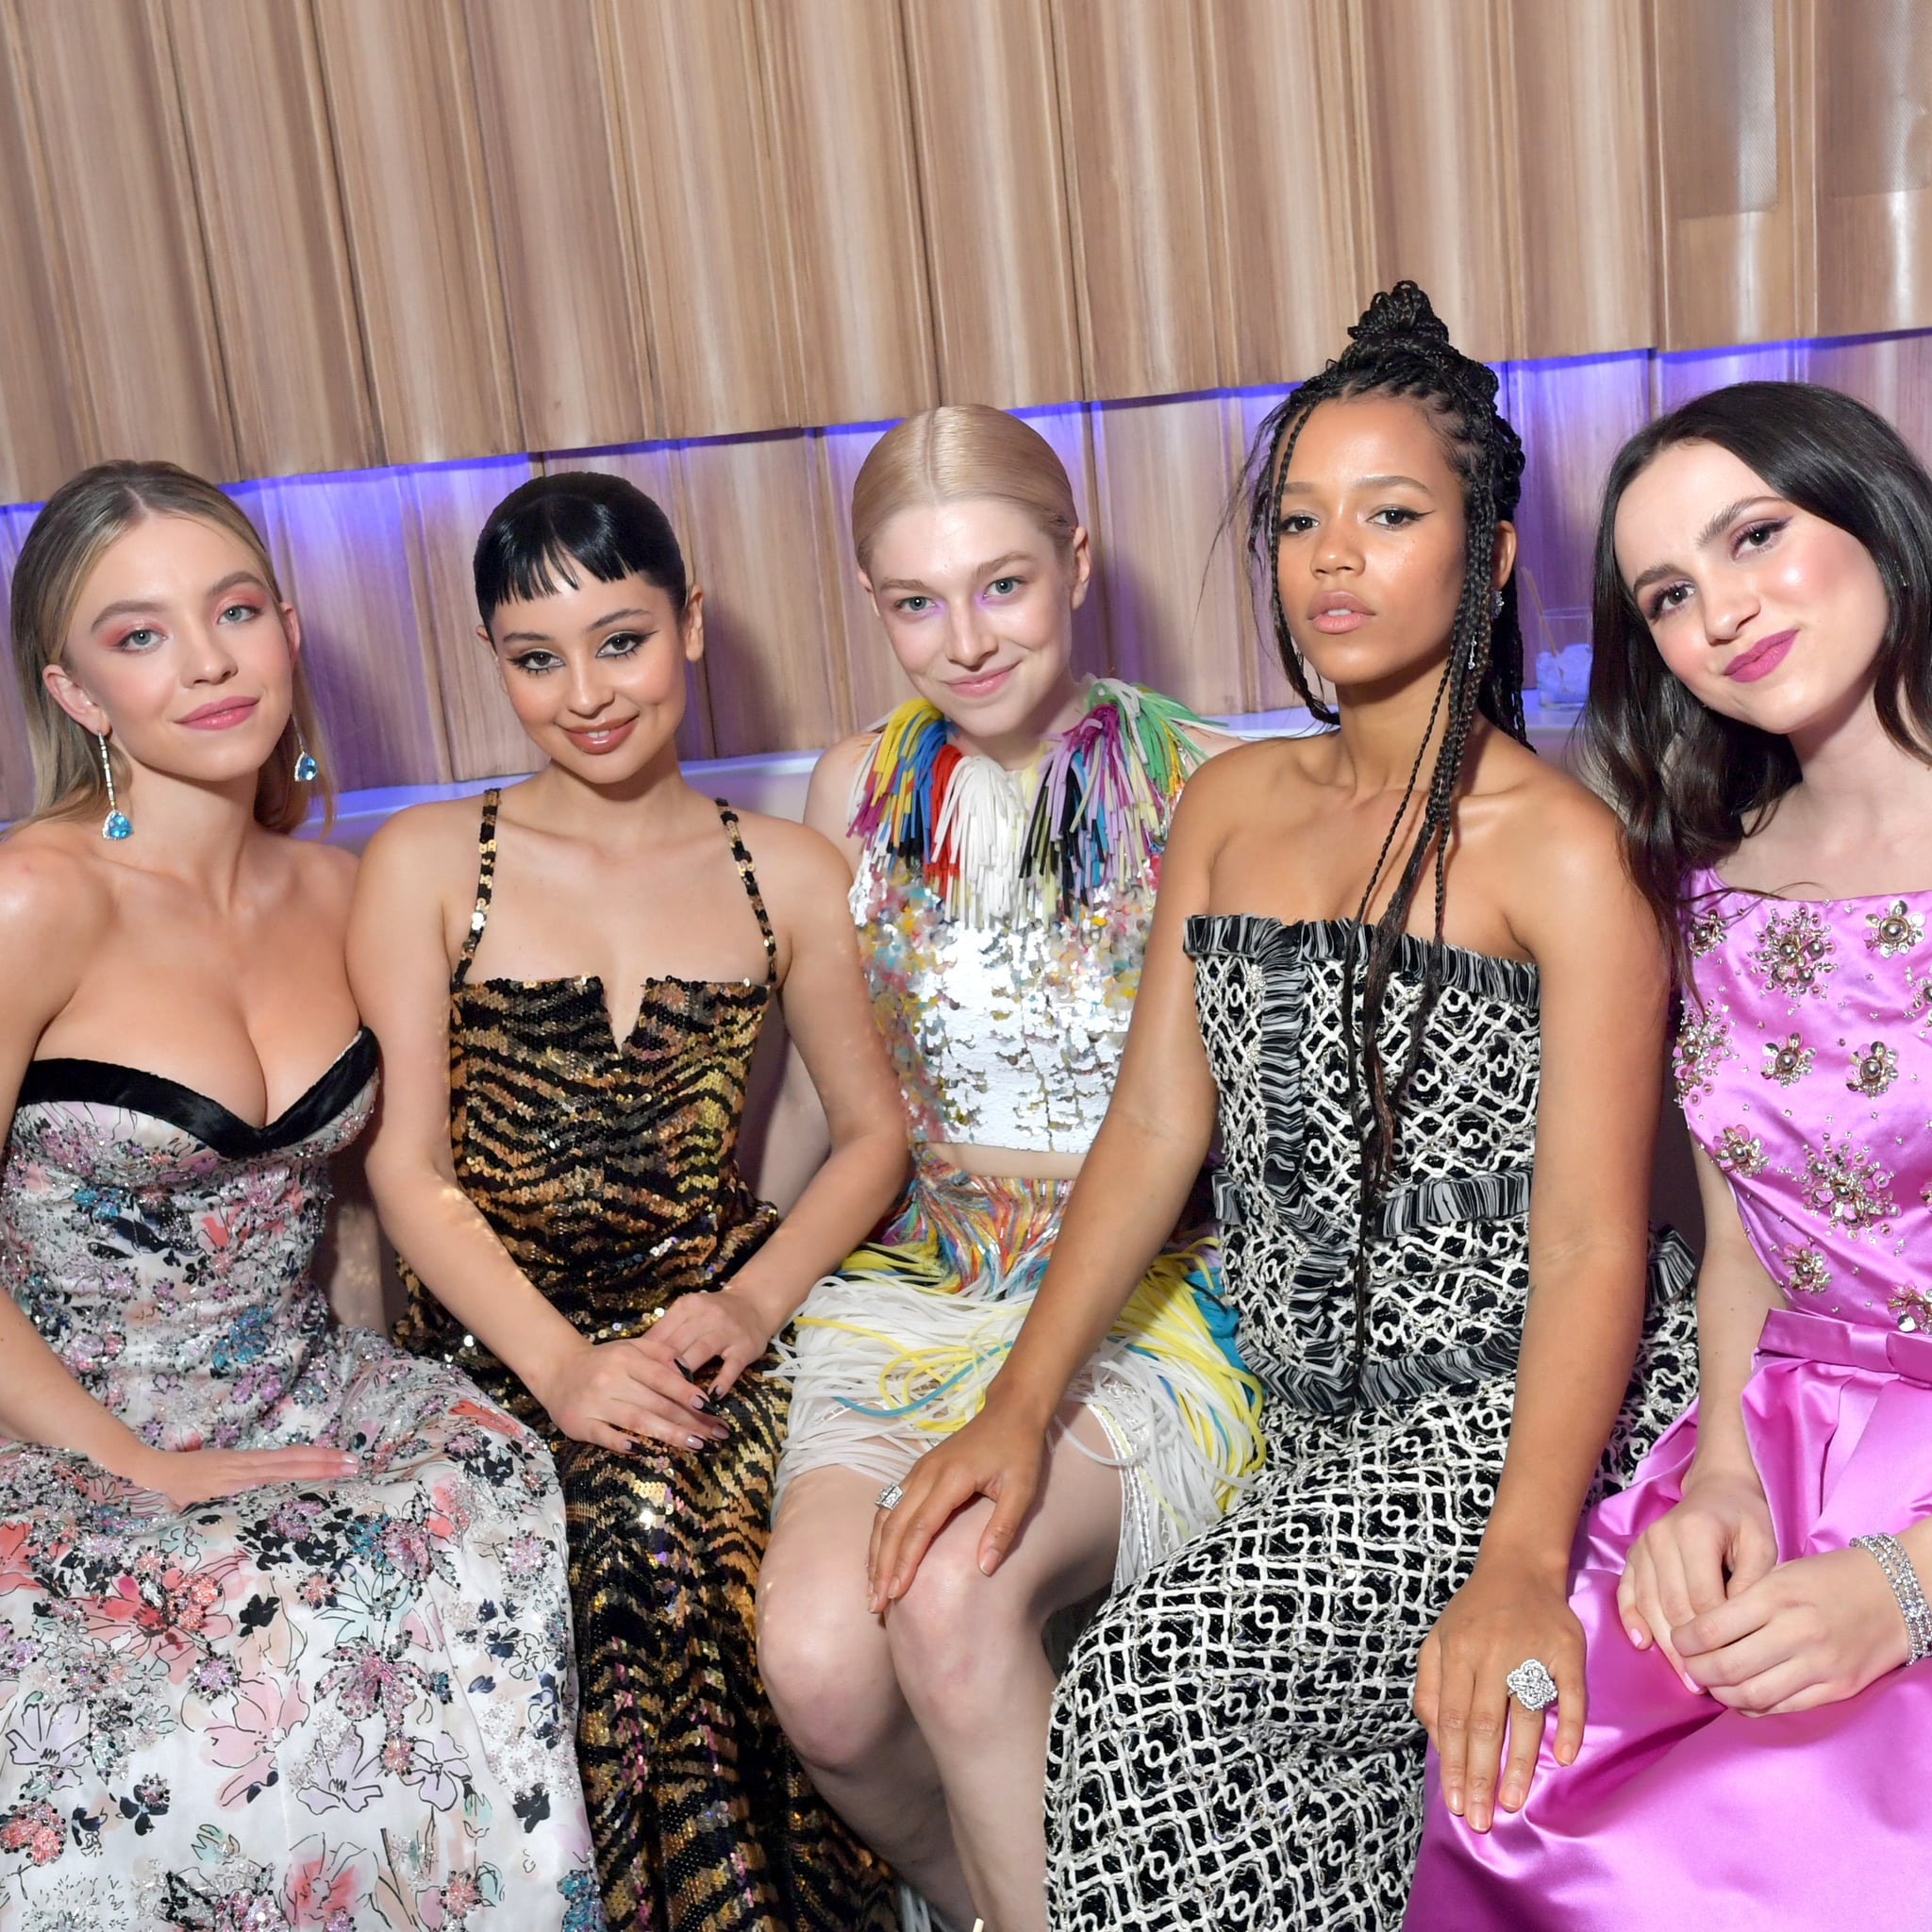 The Euphoria Cast at the 2020 Vanity Fair Oscars Afterparty